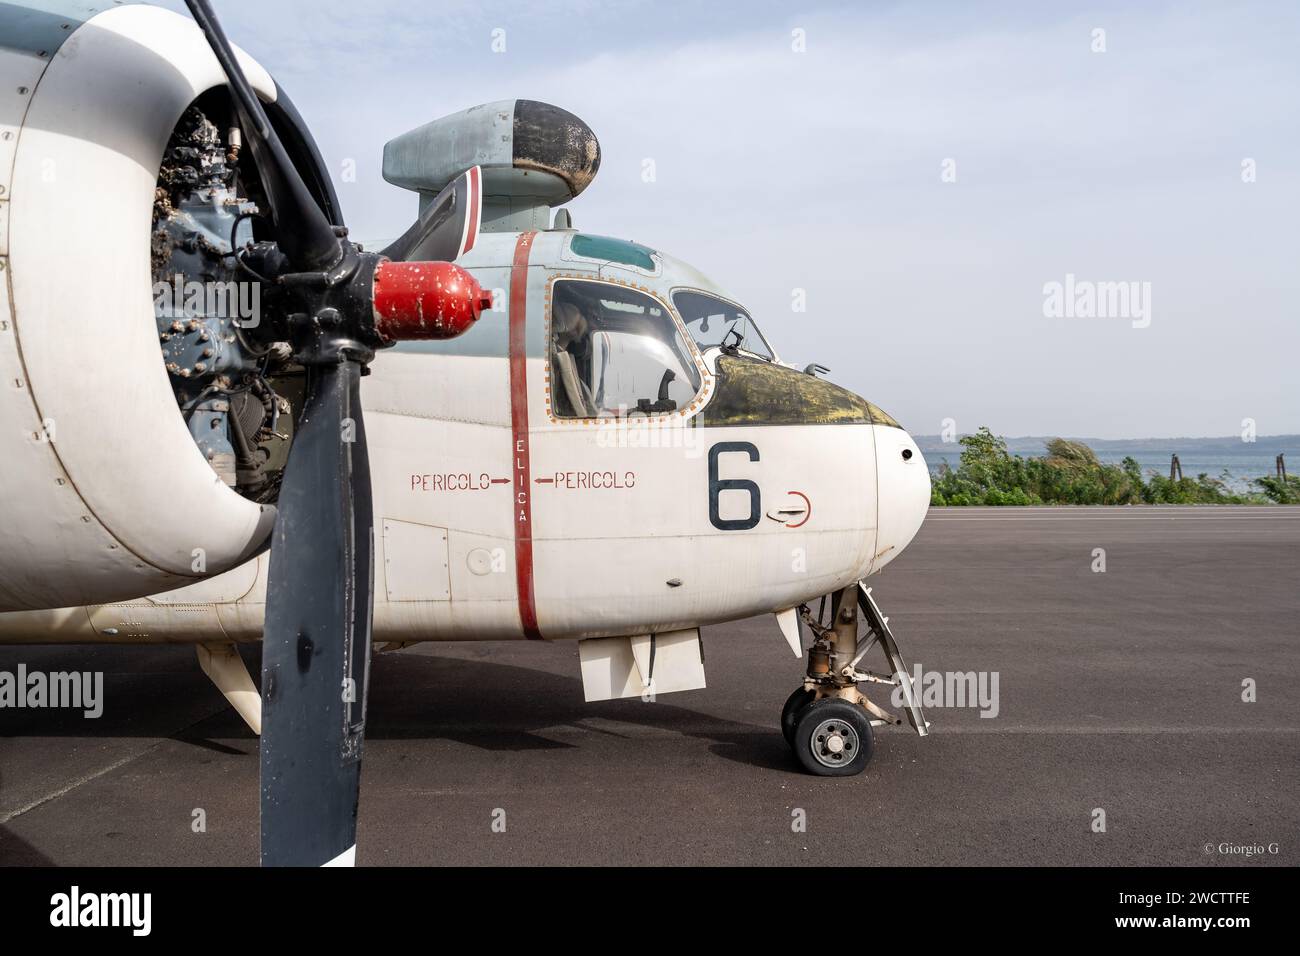 View of propeller and cockpit of historic military airplane in exhibition at Italian Airforce Museum Stock Photo